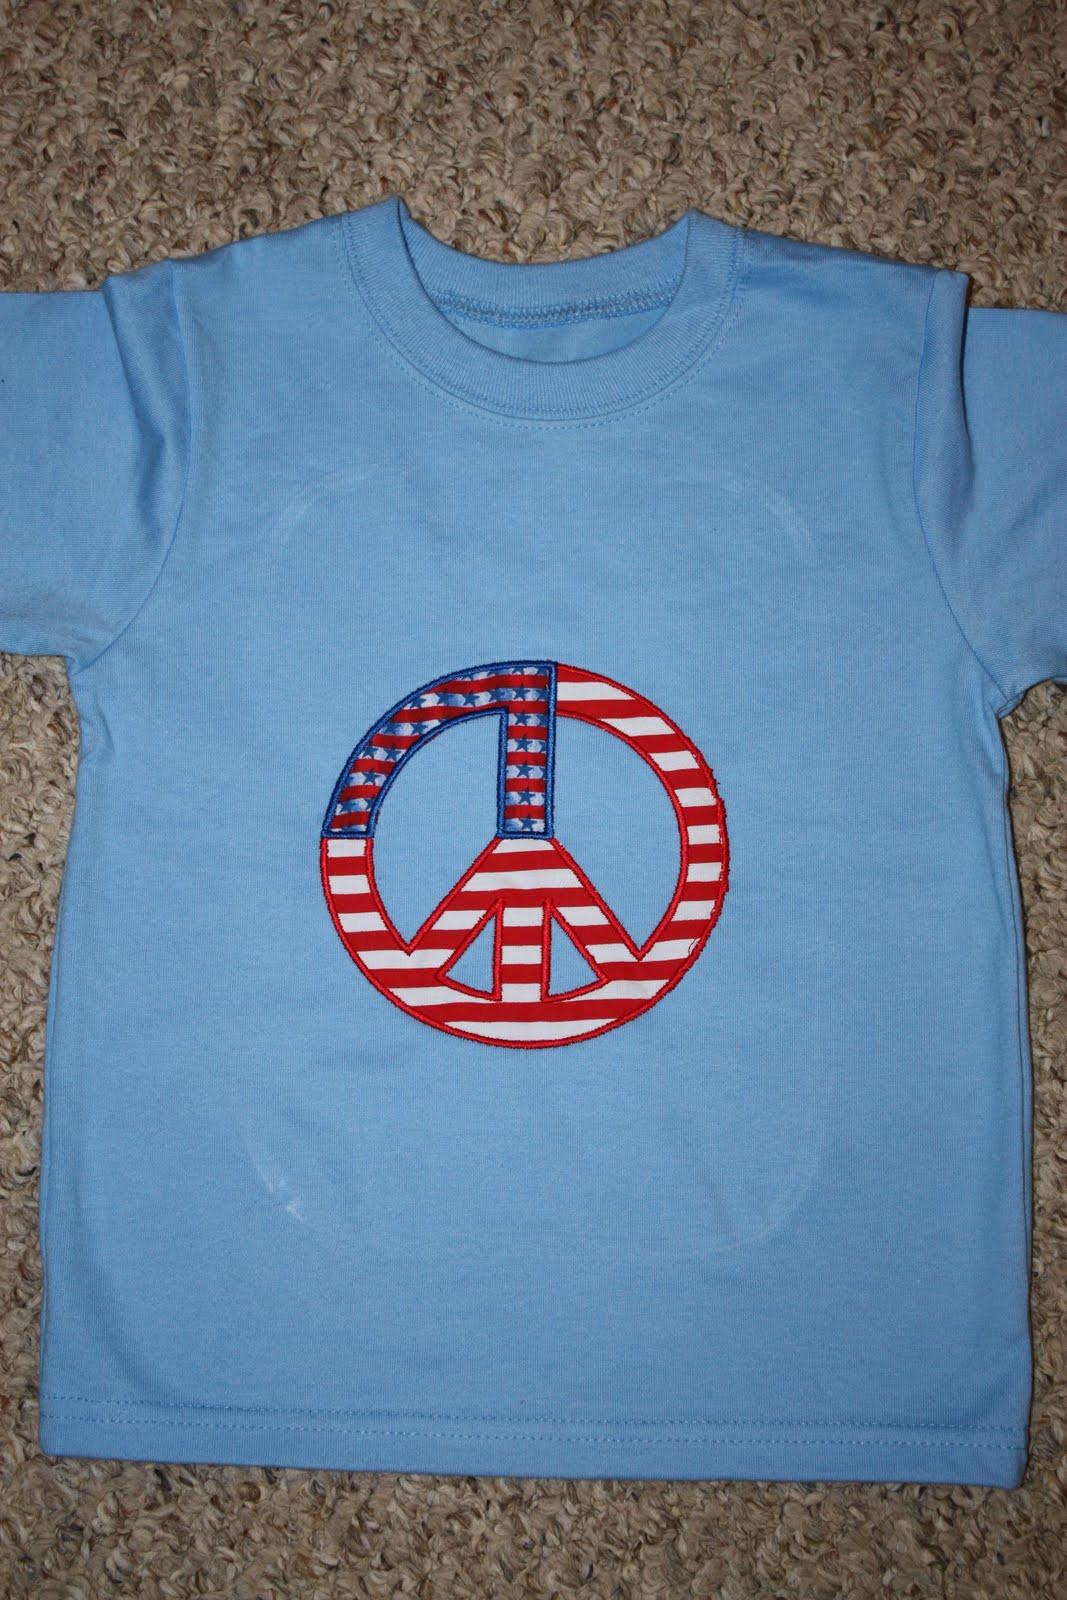 4th Of July Shirt Ideas
 Just So Cute Designs 4th of July Shirts